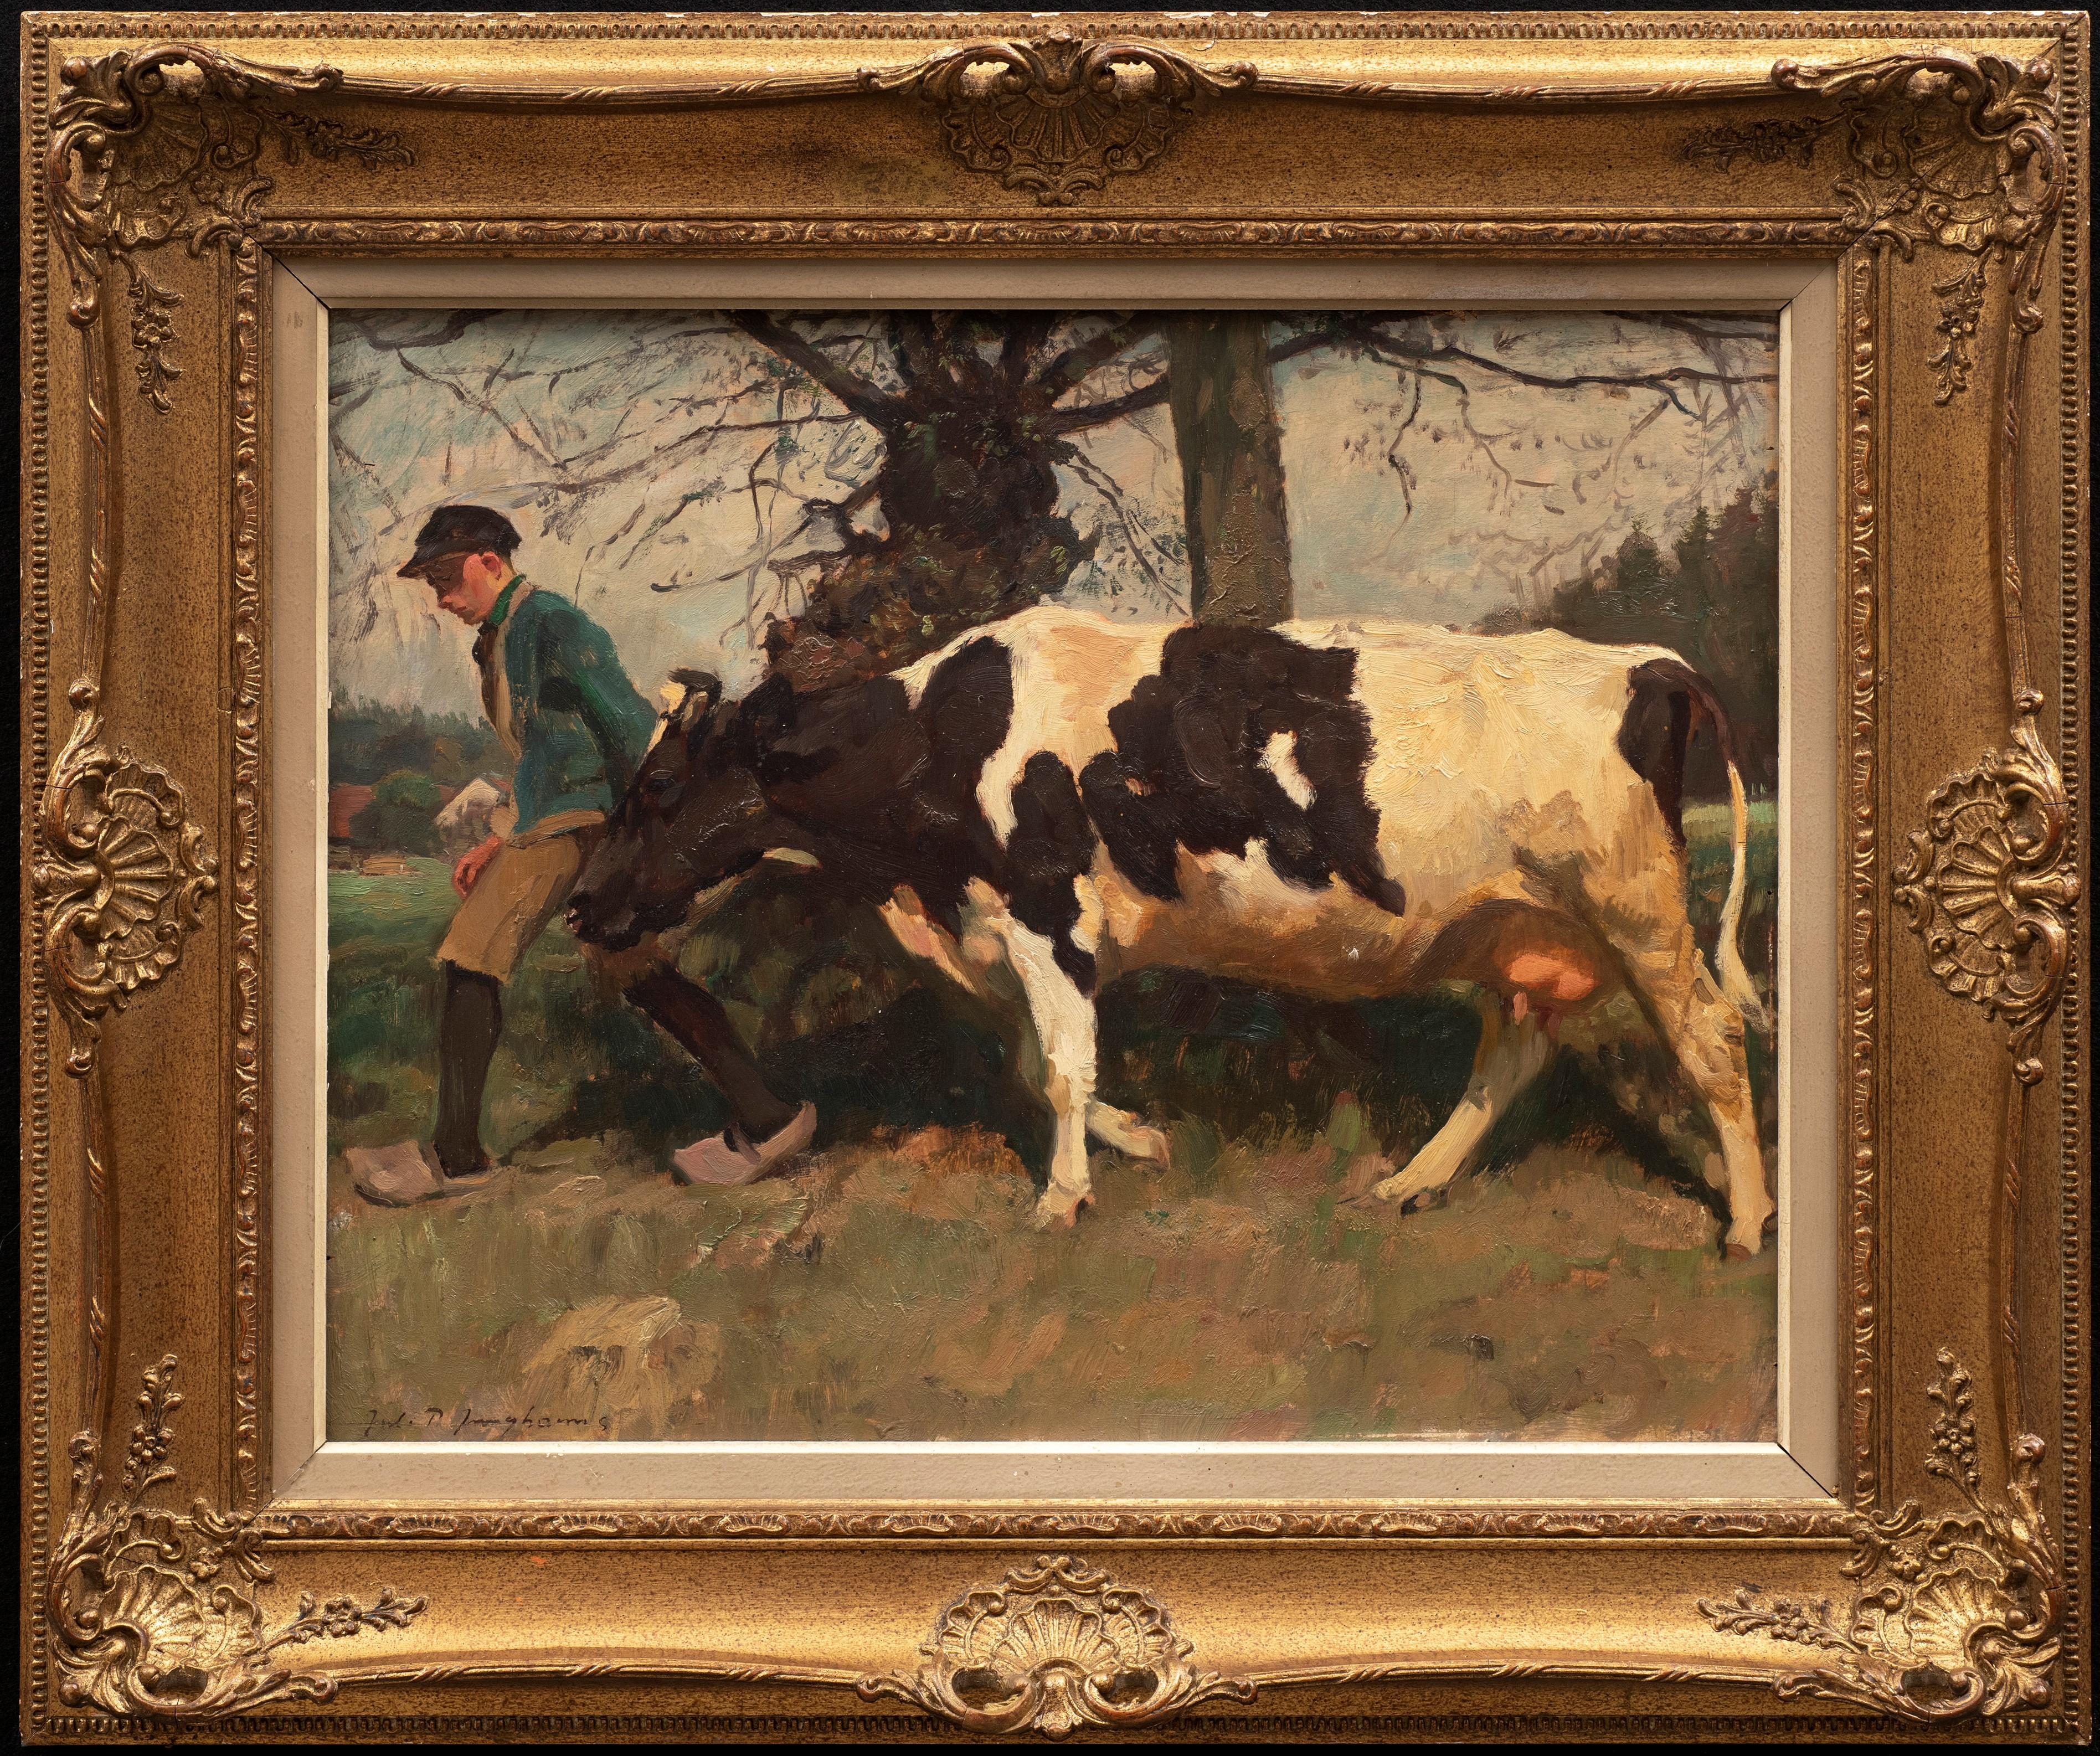 Cow Painting "Young Farmer Leading his Calf" Julius Paul Junghanns (1876-1958)